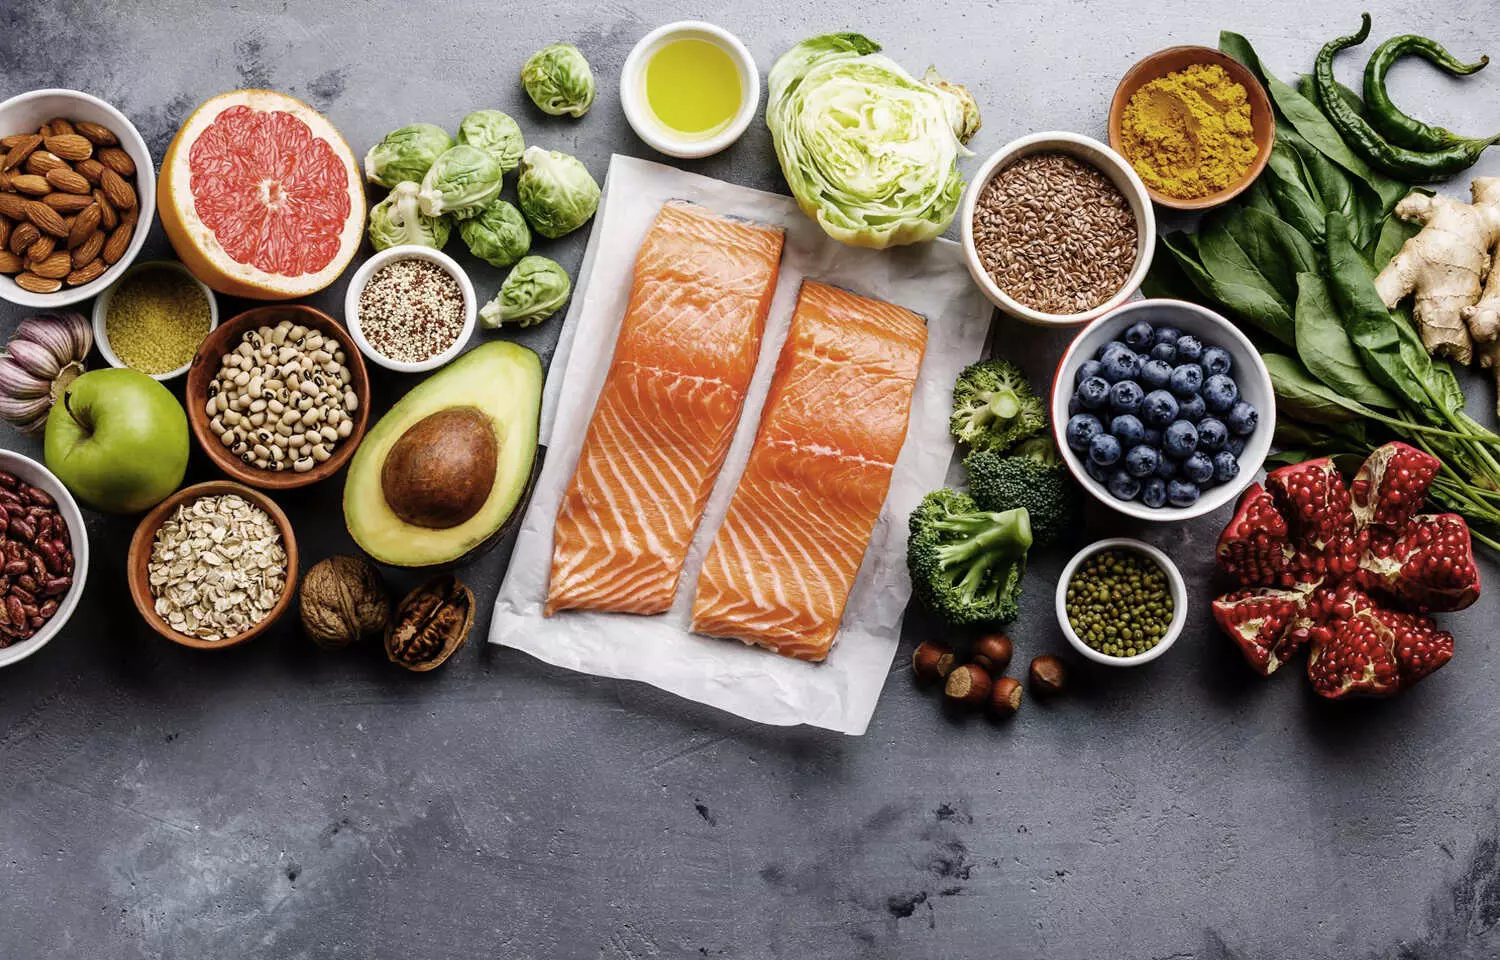 Foods rich in saturated fatty acids and high protein linked to better thyroid function: Study